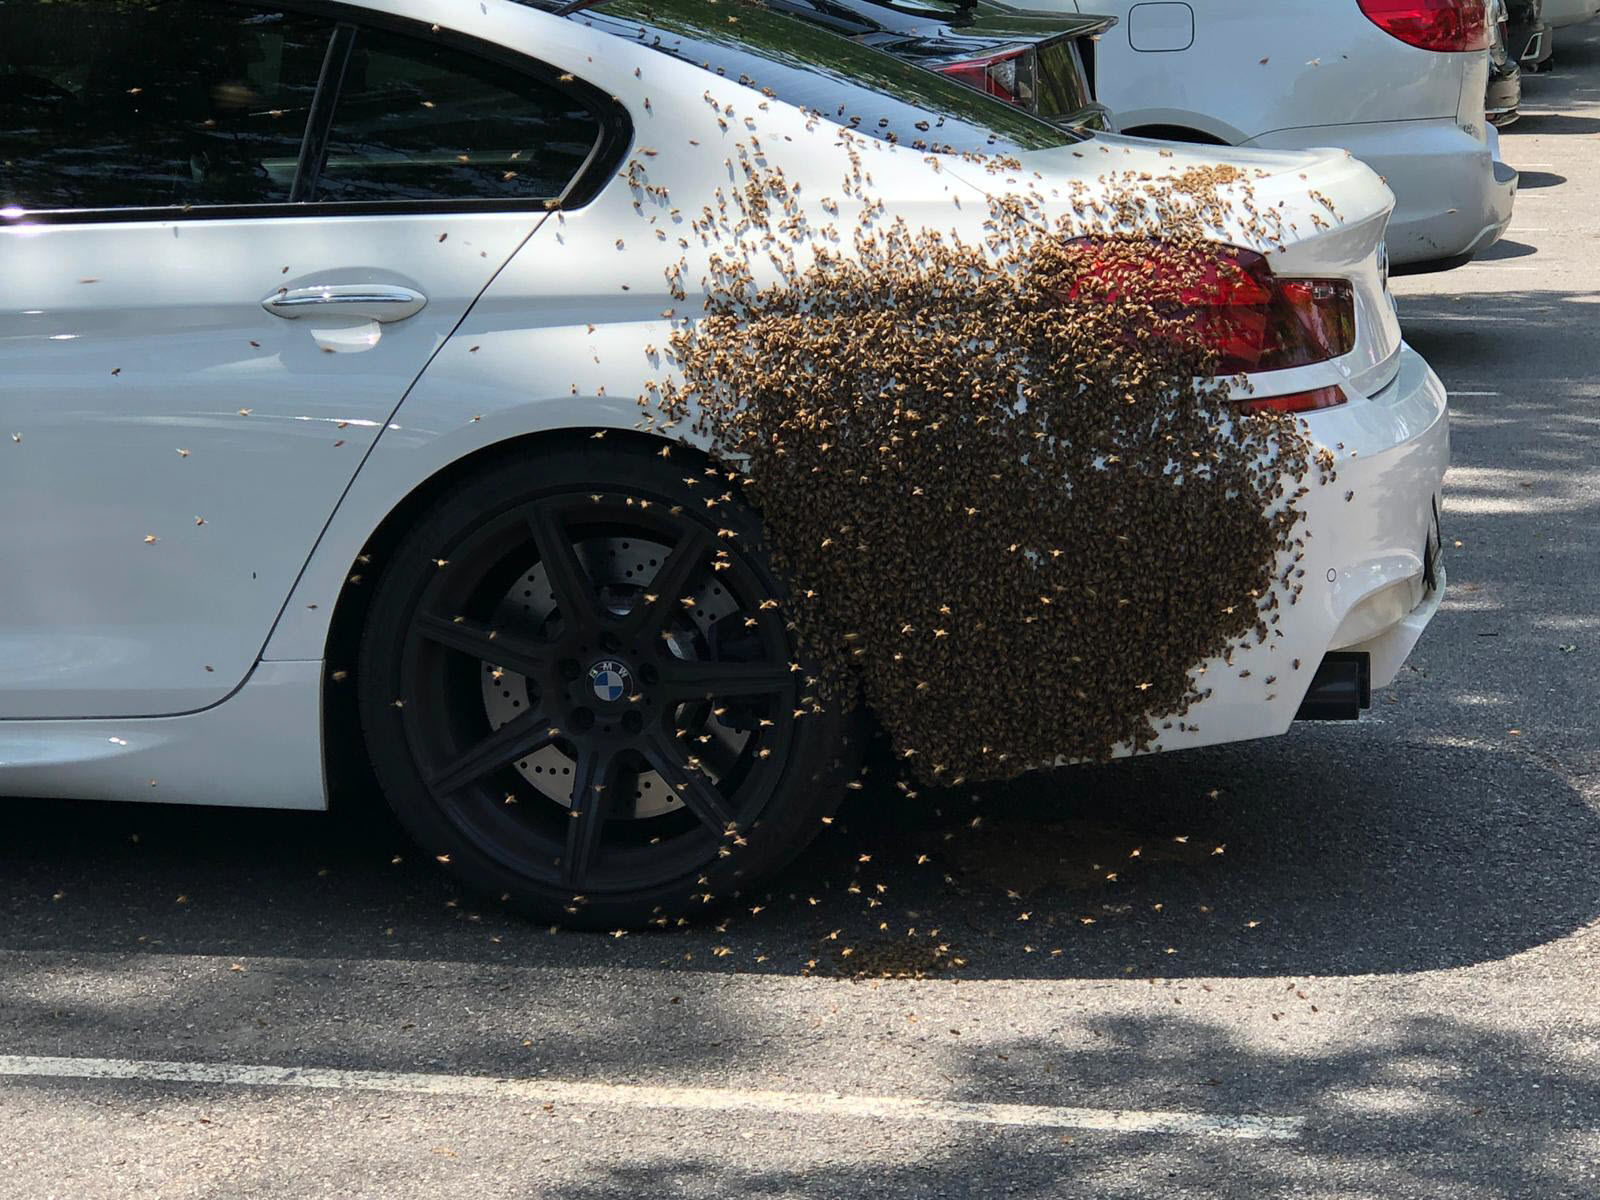 Thousands of bees swarmed a car in Fairfax County, Virginia, on Tuesday, April 30, 2019. Fire Capt. David Weand knew how to handle the situation. (Courtesy Fairfax County Fire and Rescue)